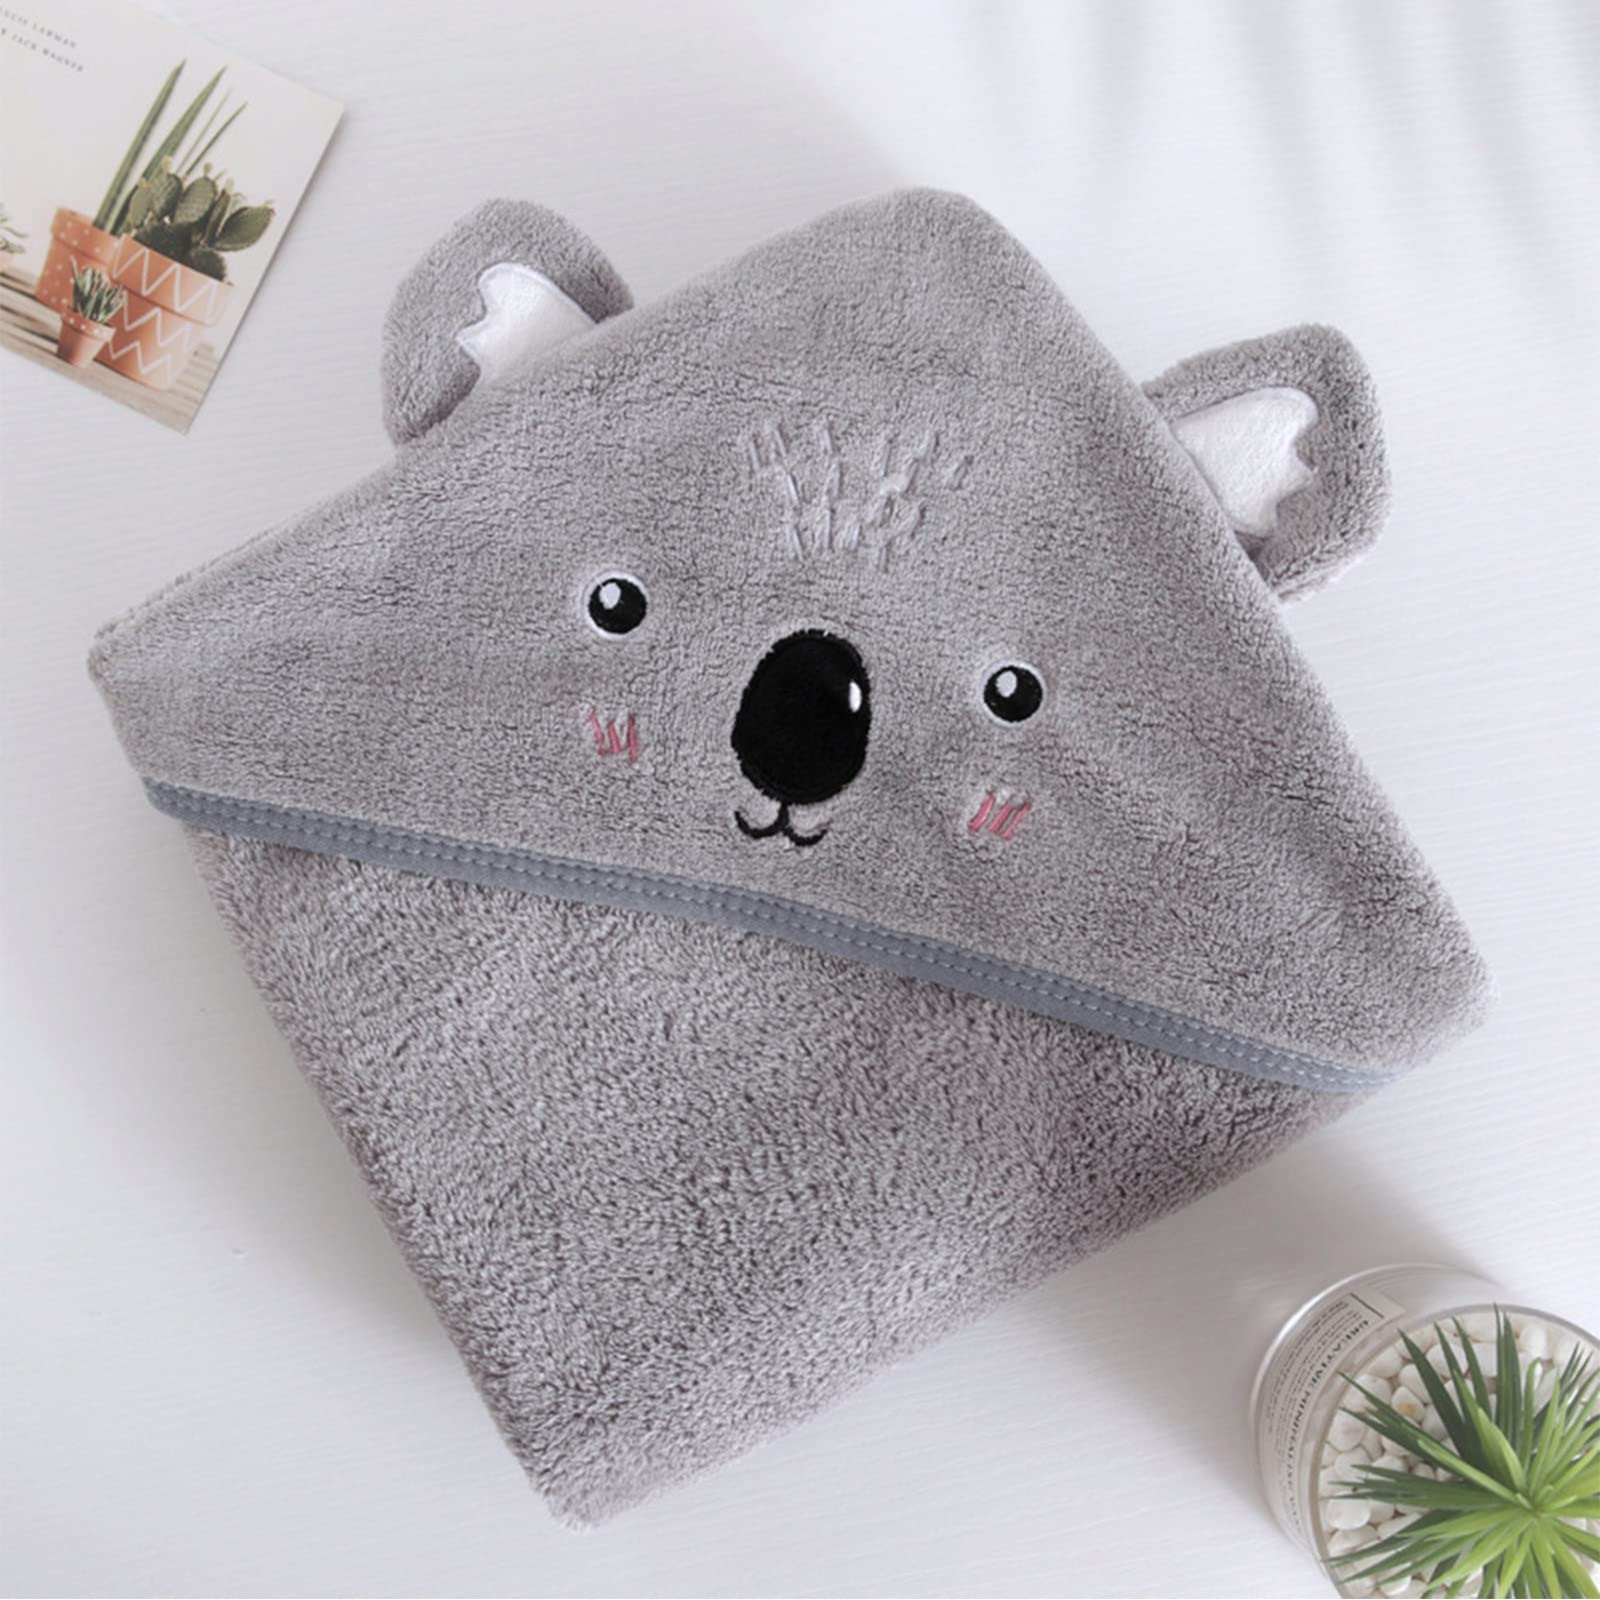 Asnewkit Hooded Baby Towel, Baby Bath Towels with Hood,Unique Animal Design Baby Towel with Hood Soft Absorbent Baby Bath Towels, for Newborn Baby Boy and Girl (Grey Koala)